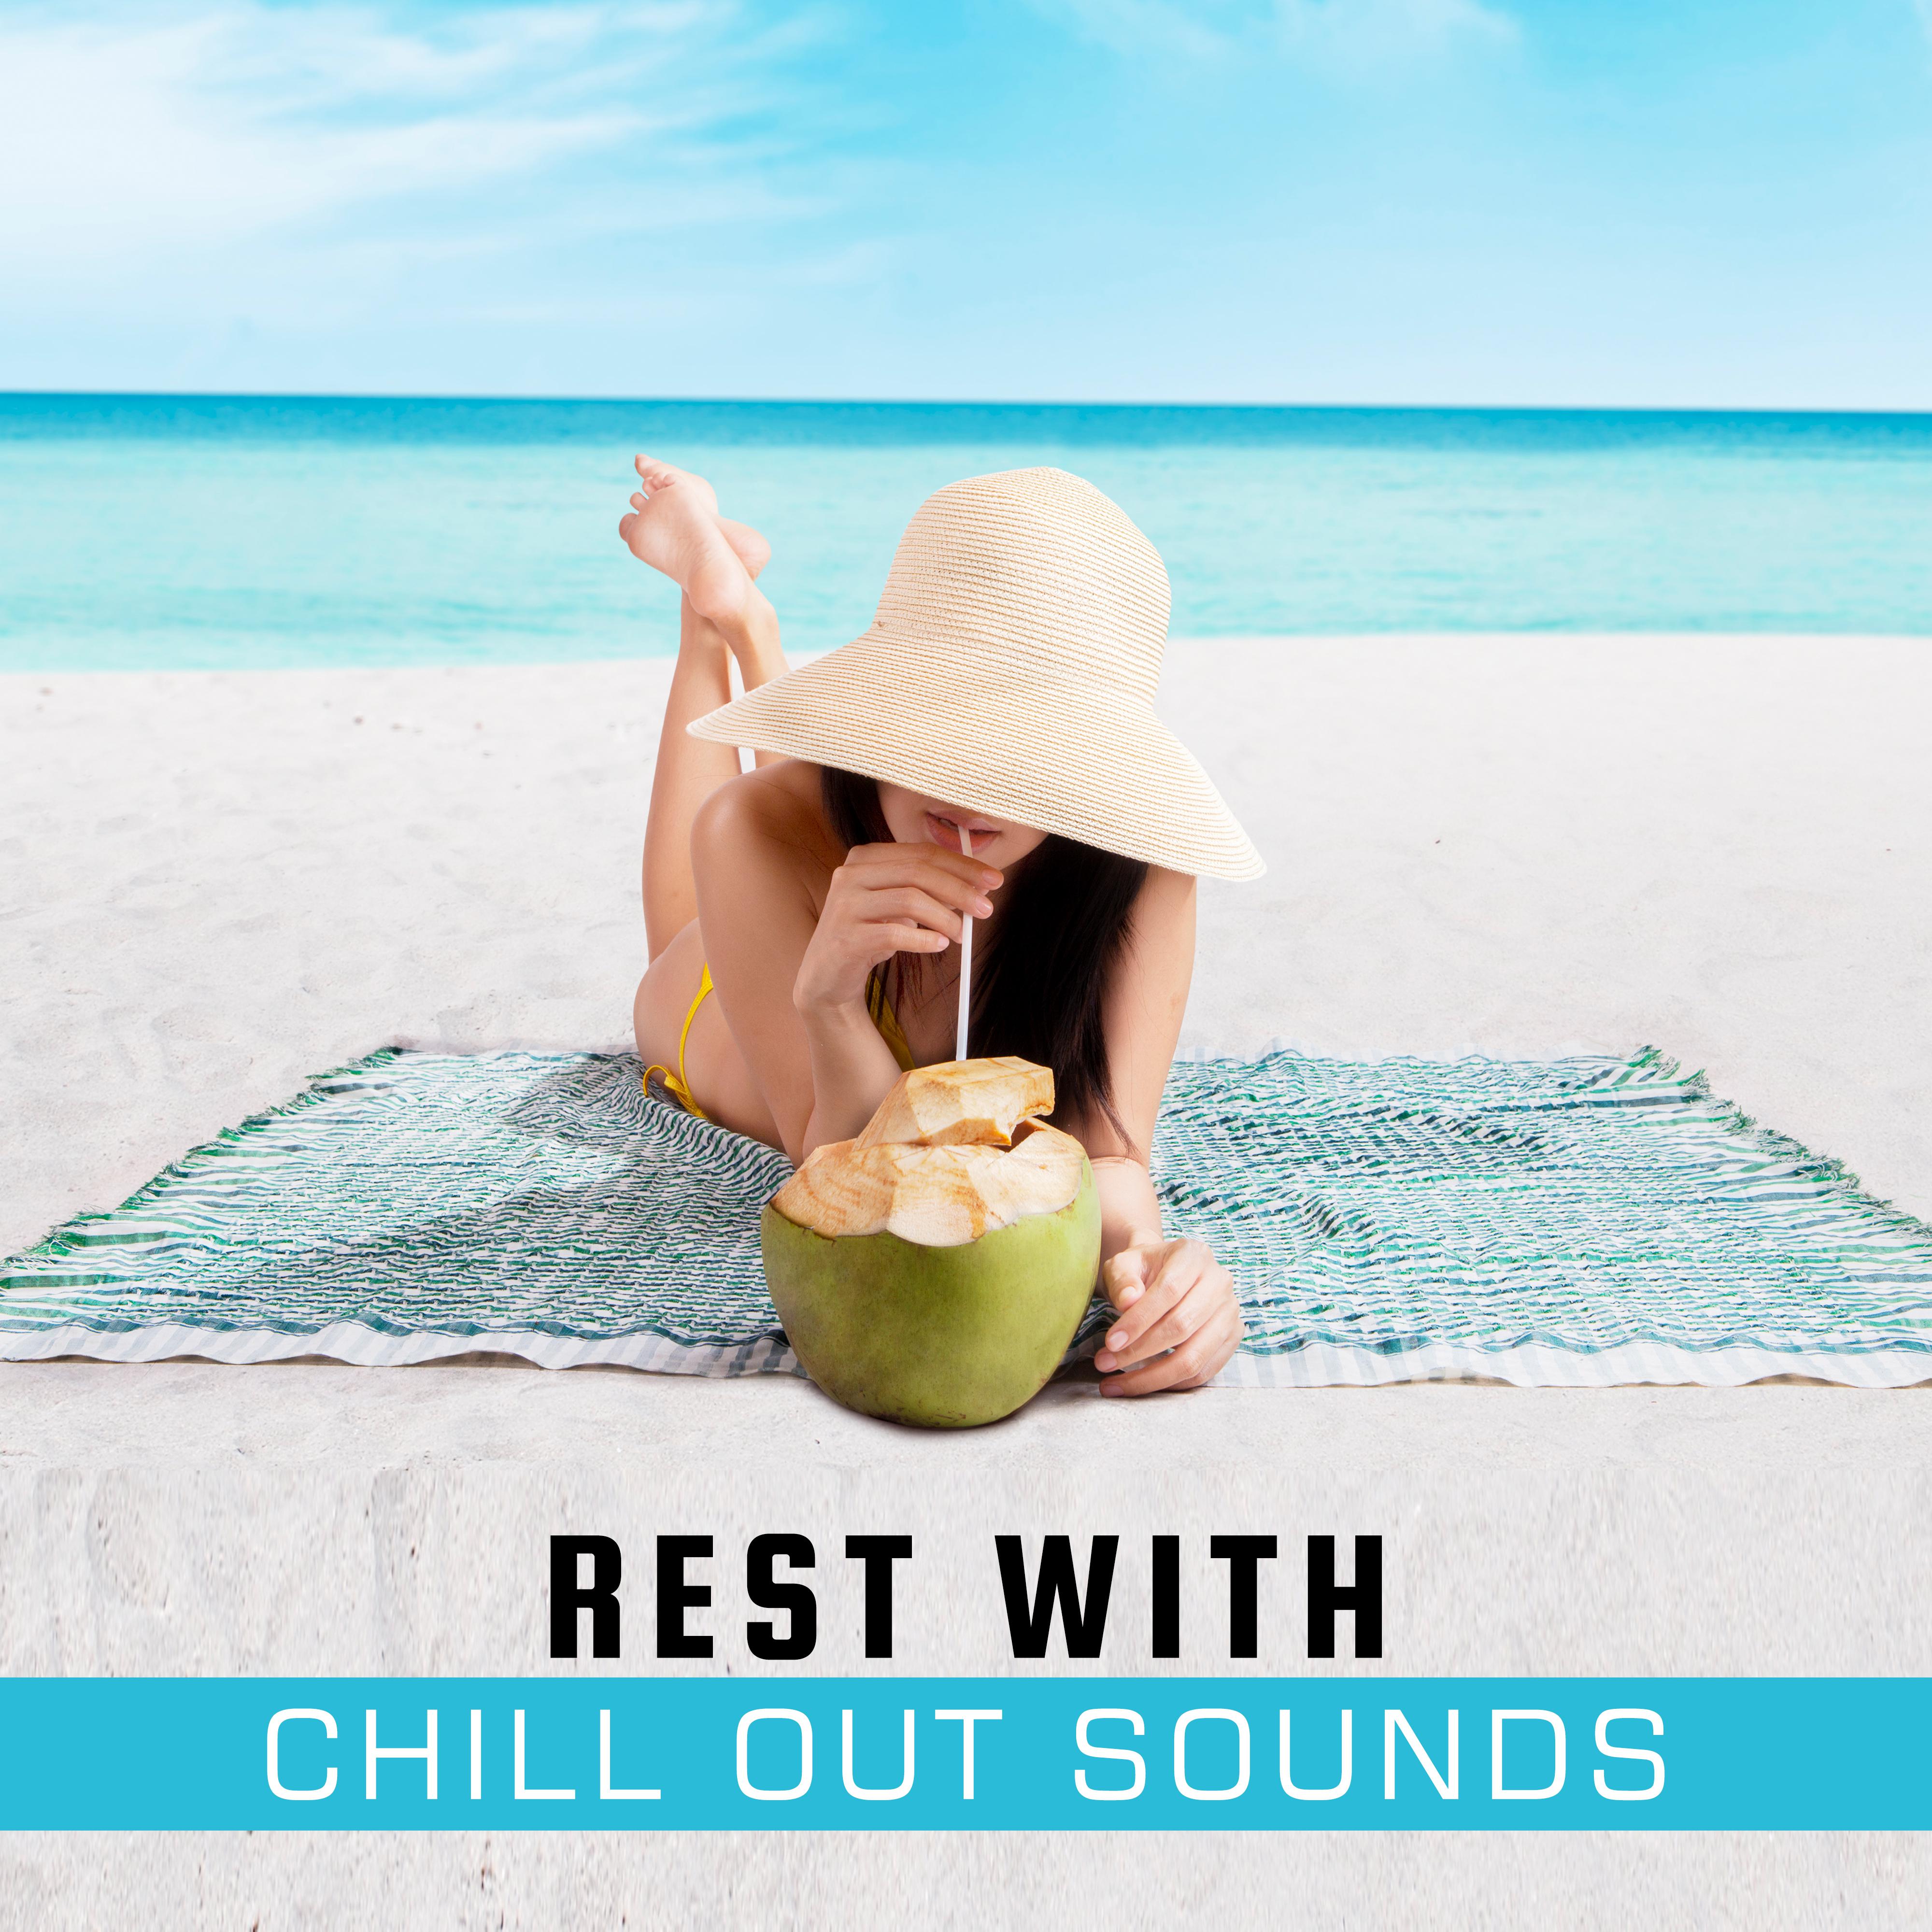 Rest with Chill Out Sounds